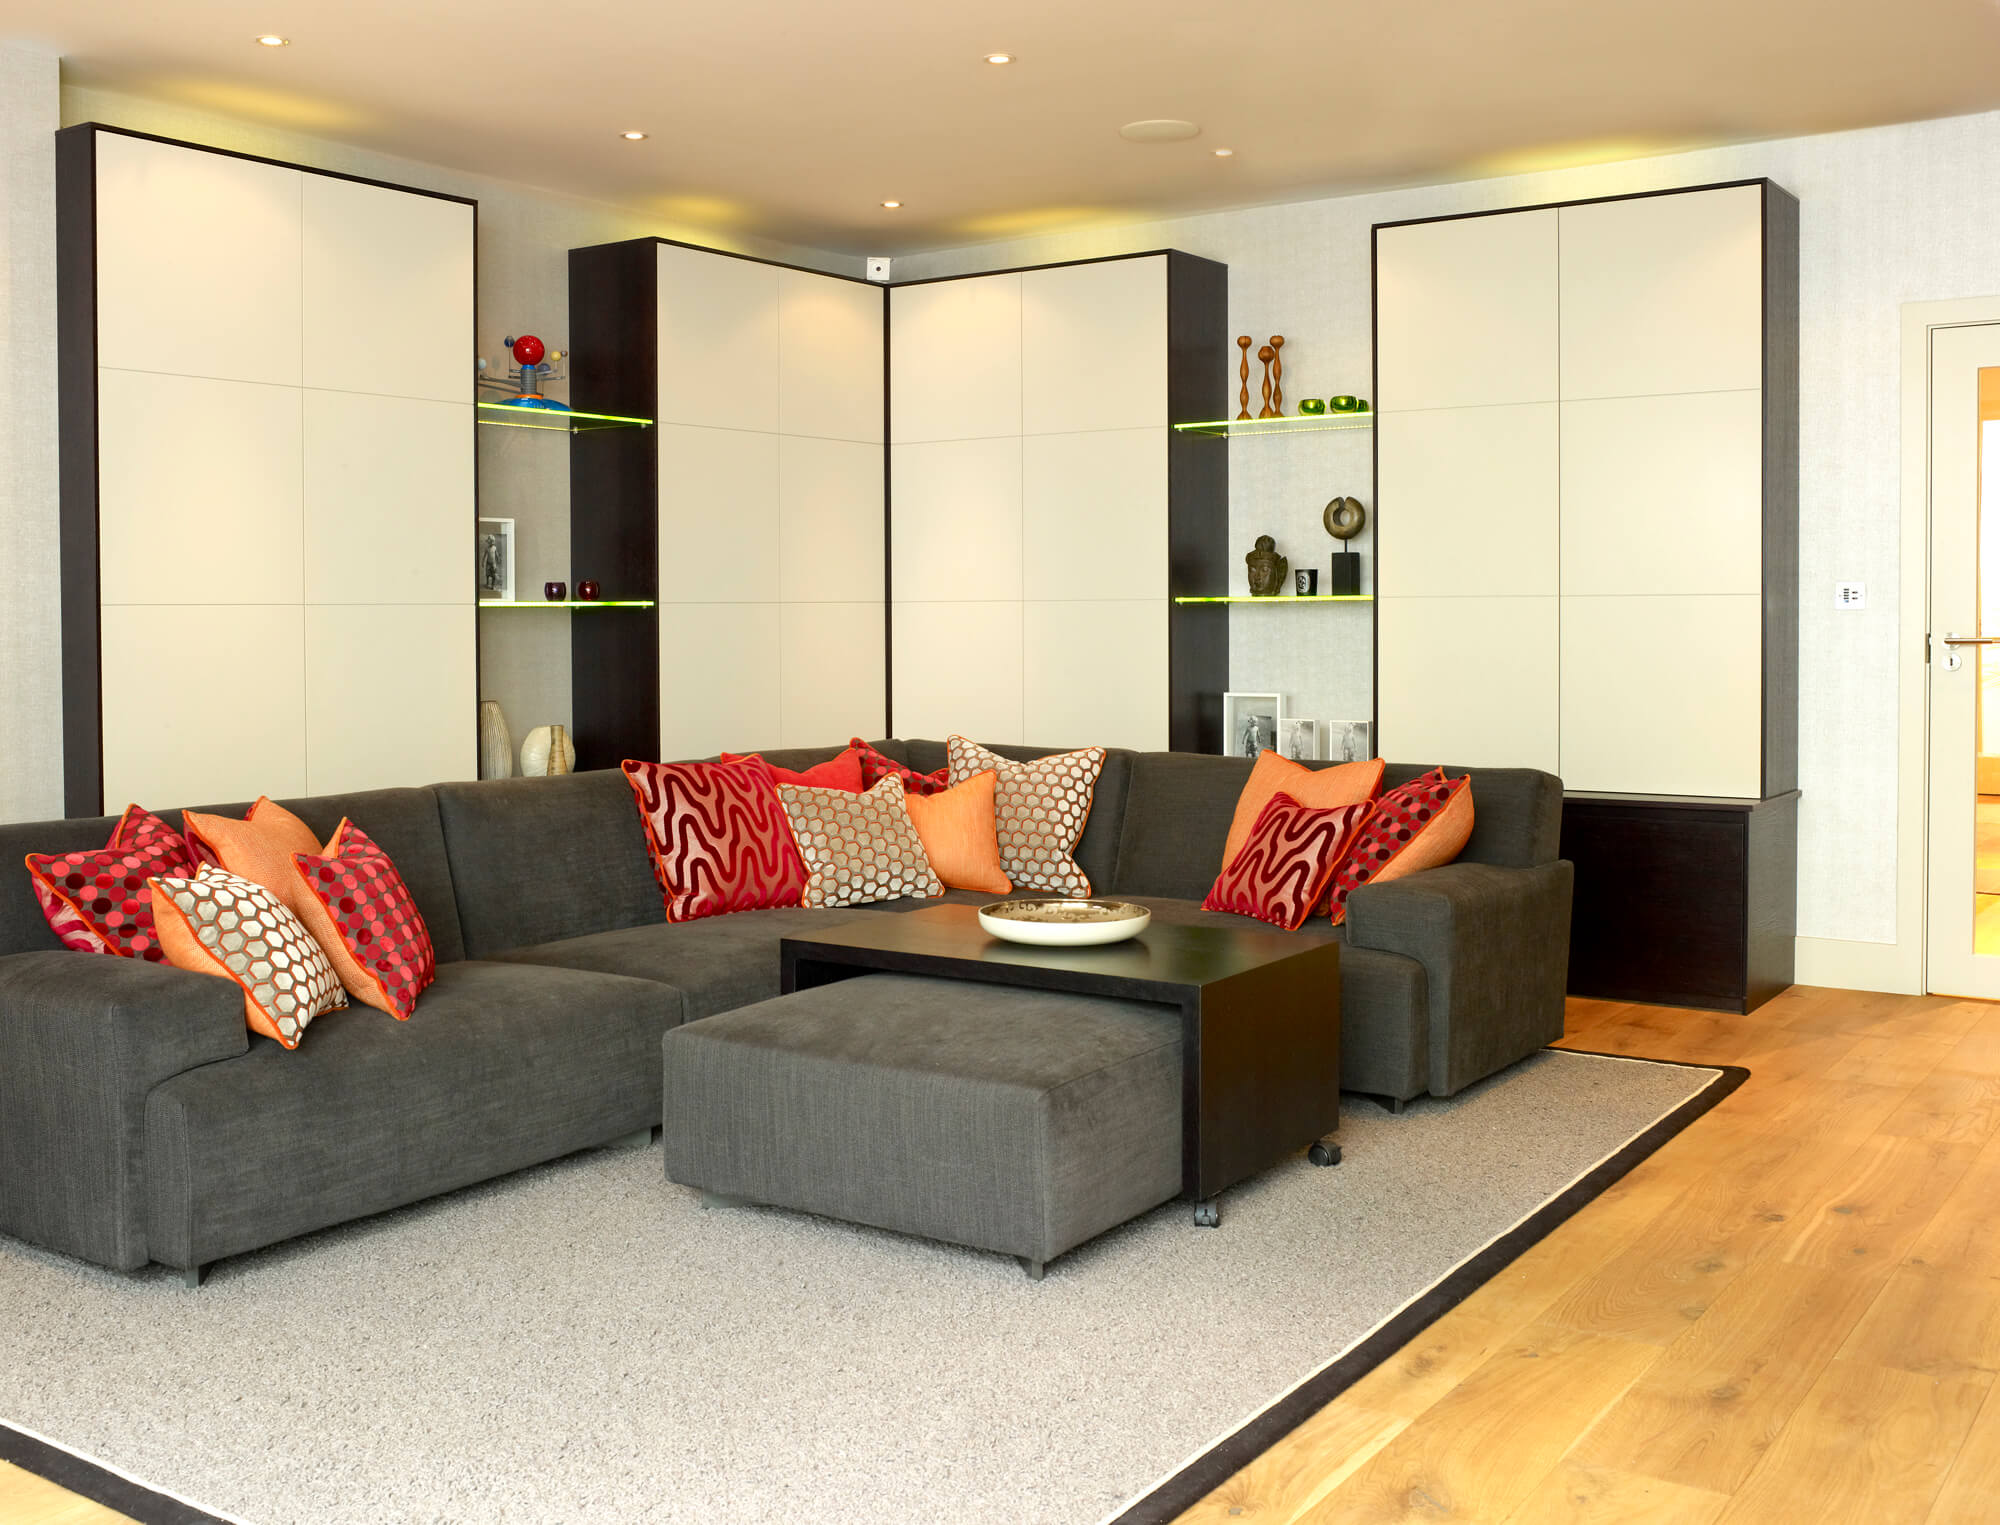 Basement conversion to large family home in SW18